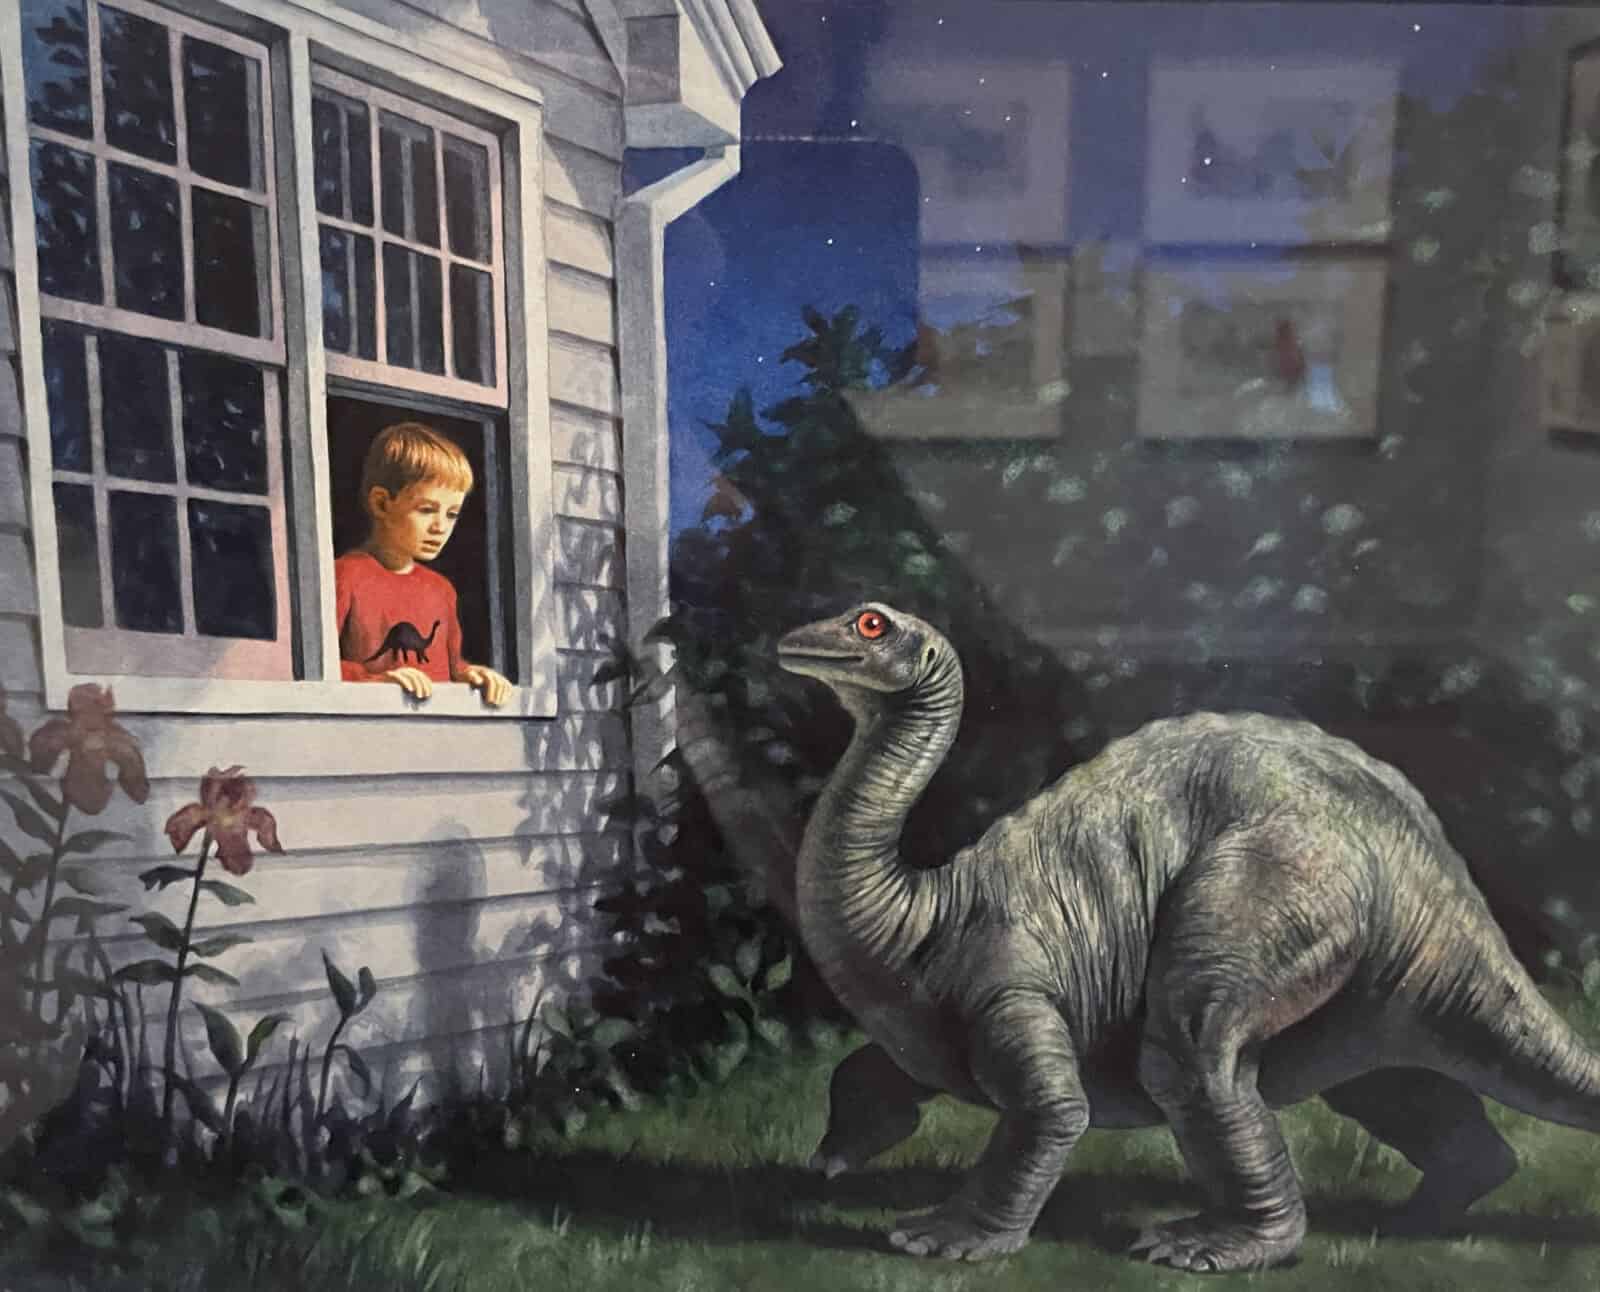 A boy looking out his window sees a baby apatosaurus on the lawn in Dennis Nolan's Dinosaur Dream. Press image courtesy of the Norman Rockwell Museum